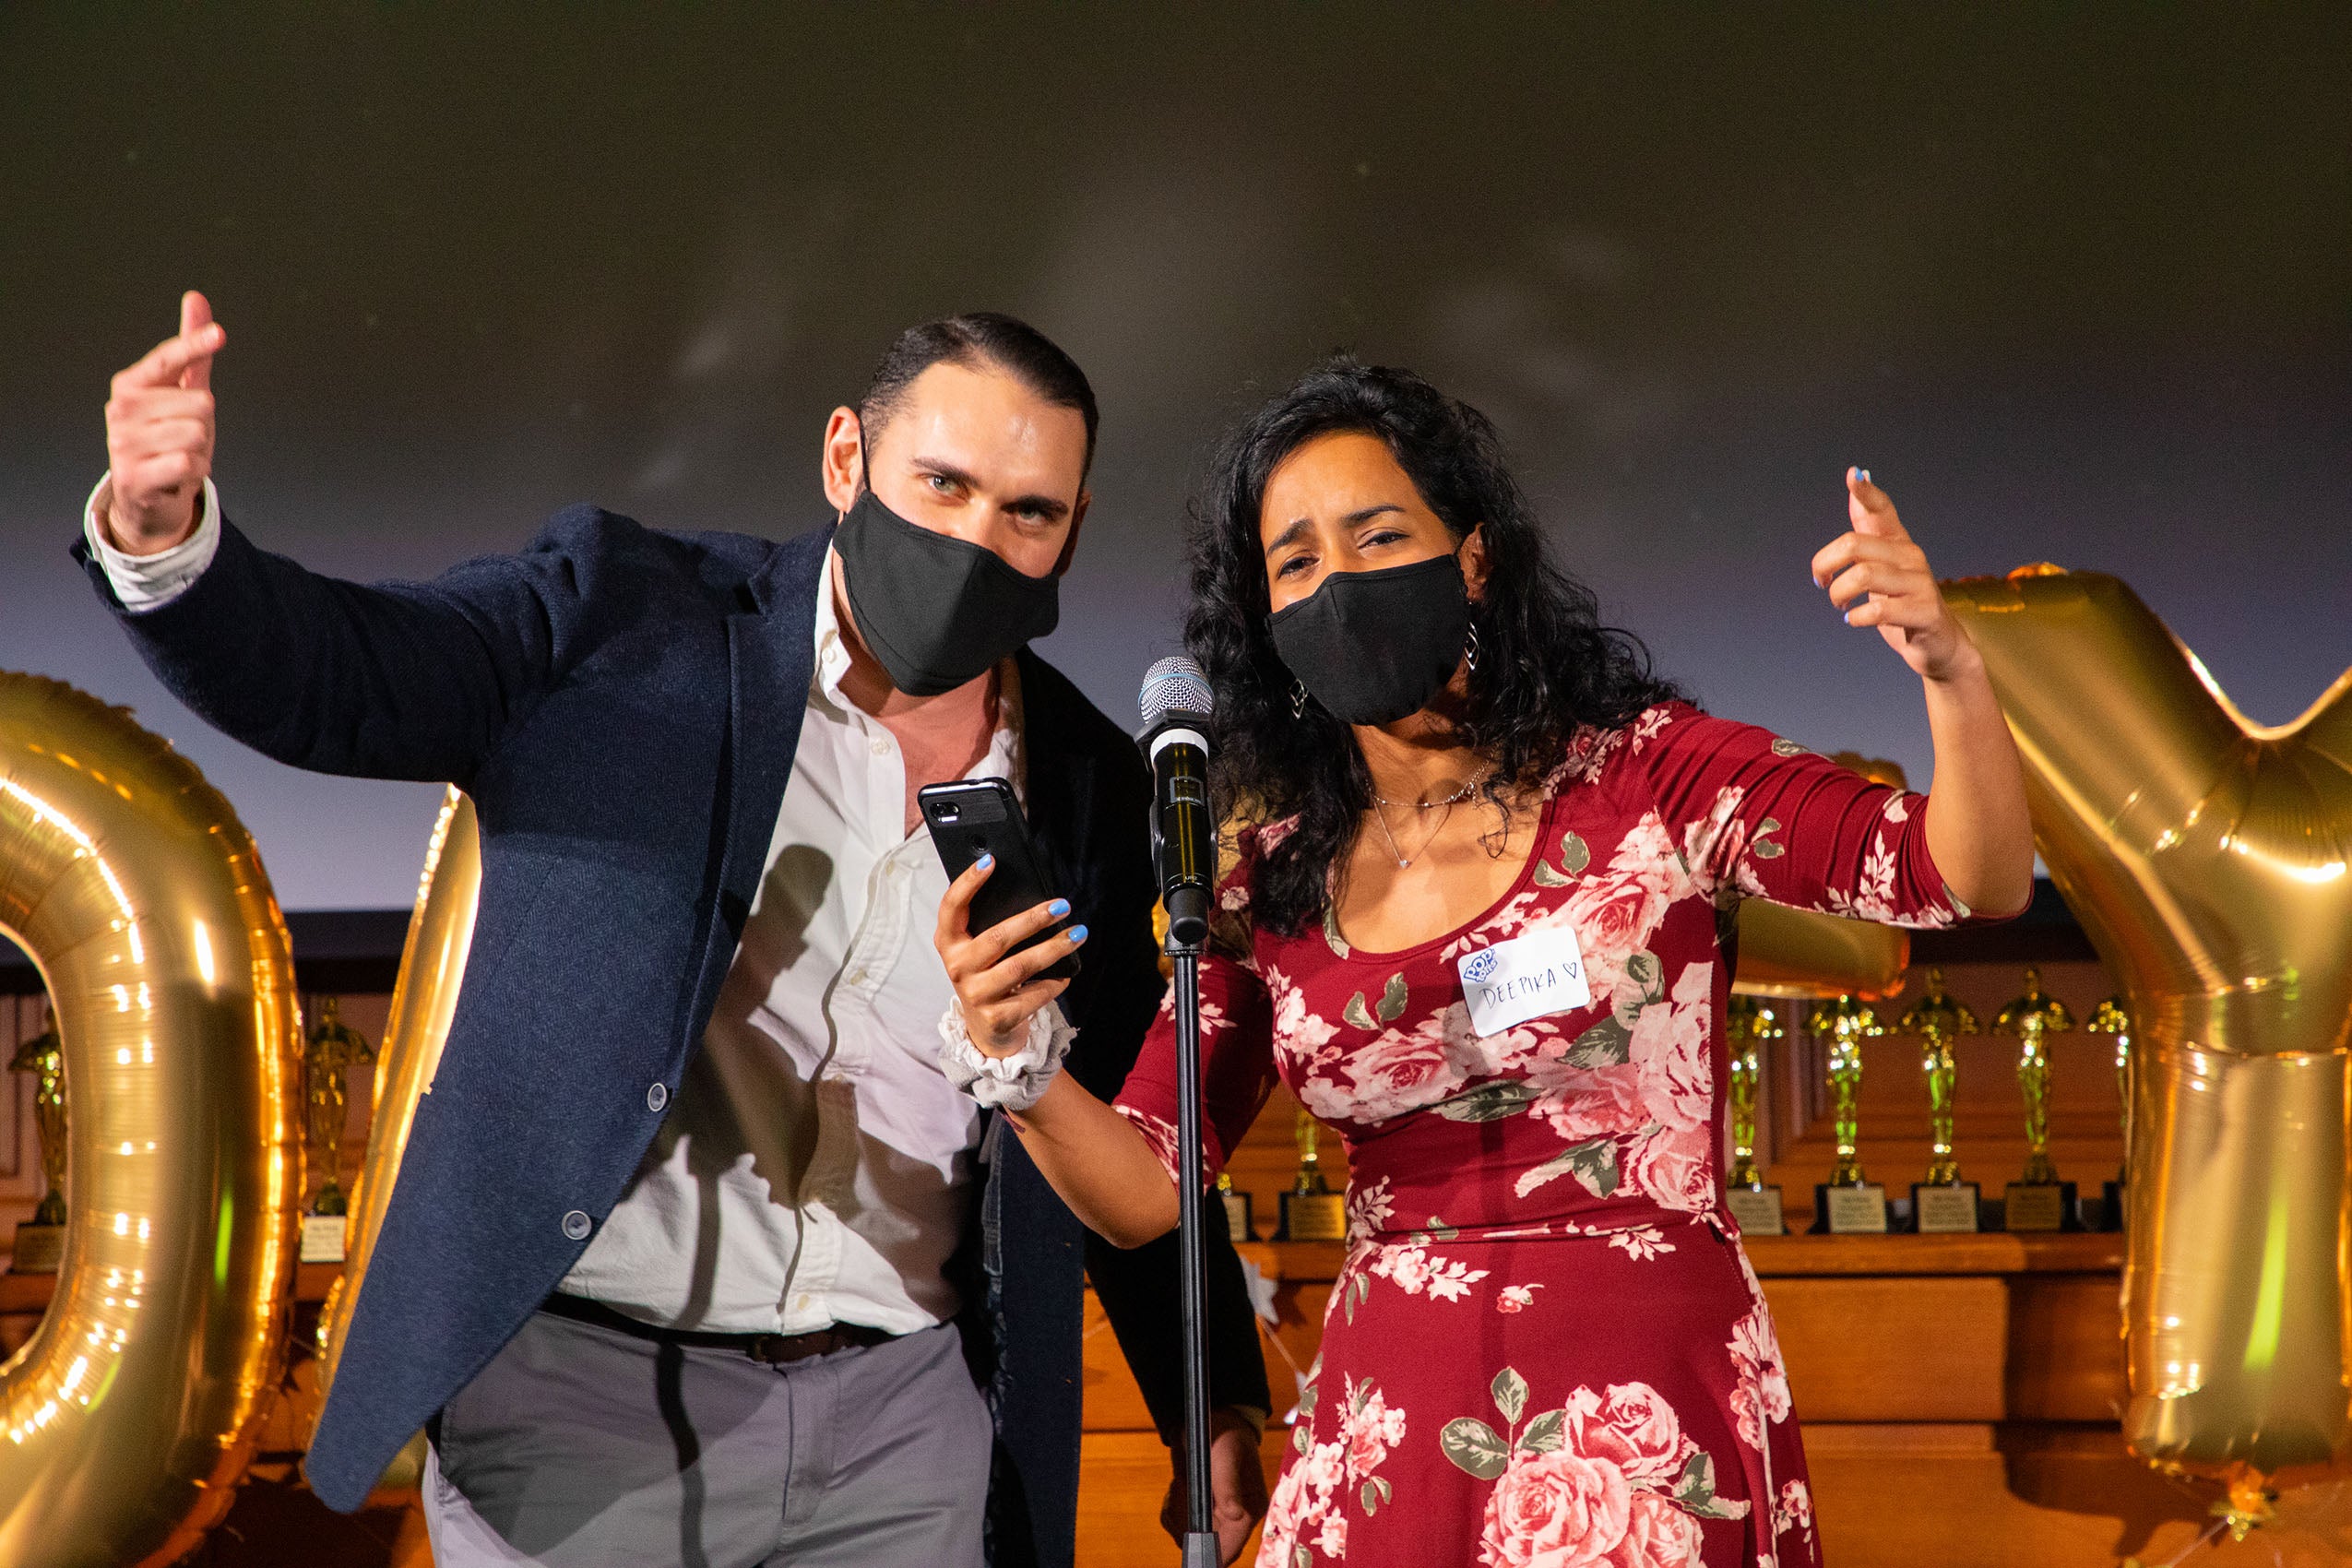 Man and woman wearing face masks, standing on stage at a microphone, looking at a cellular phone and gesturing.